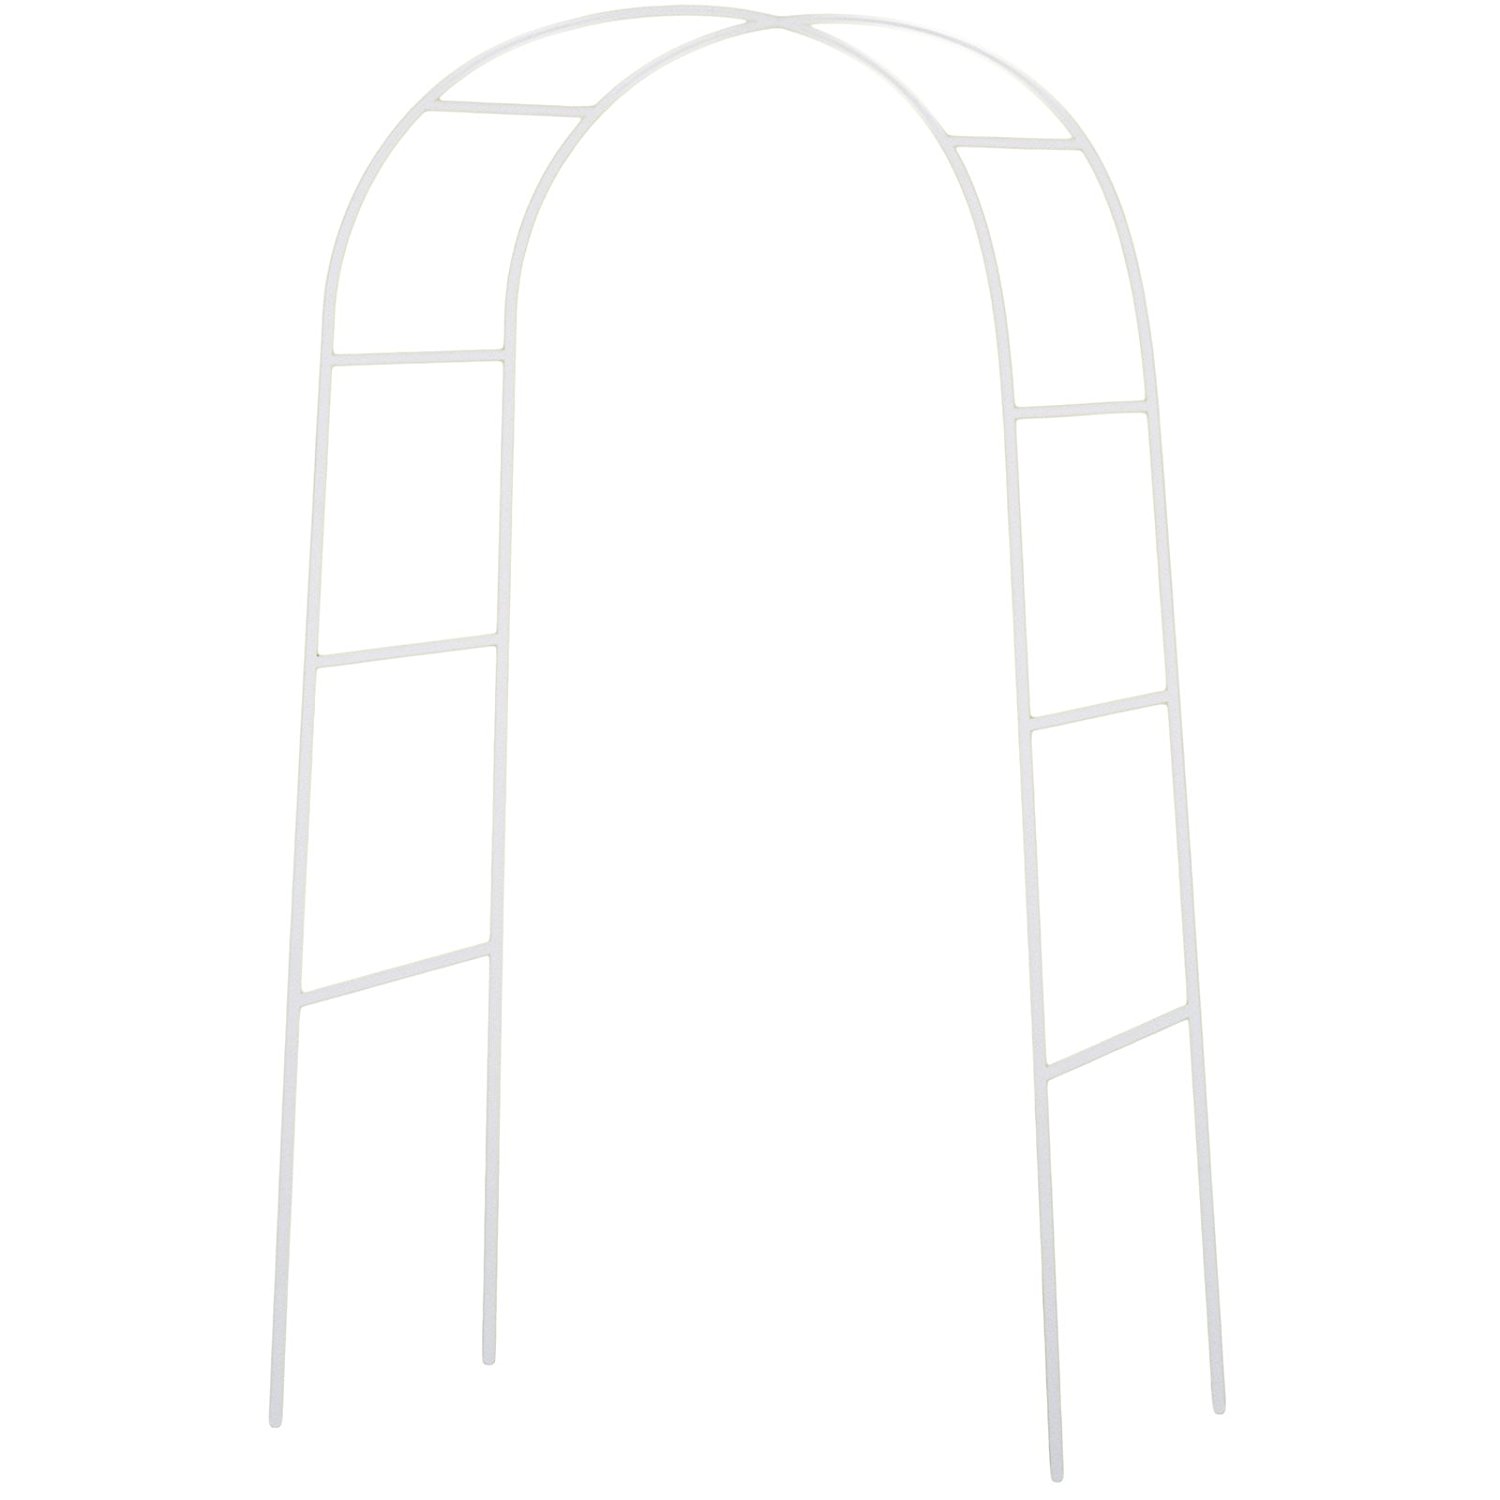 Amazon.com: NStar Real Sized Metal Decoration Arch, White: Arts ...